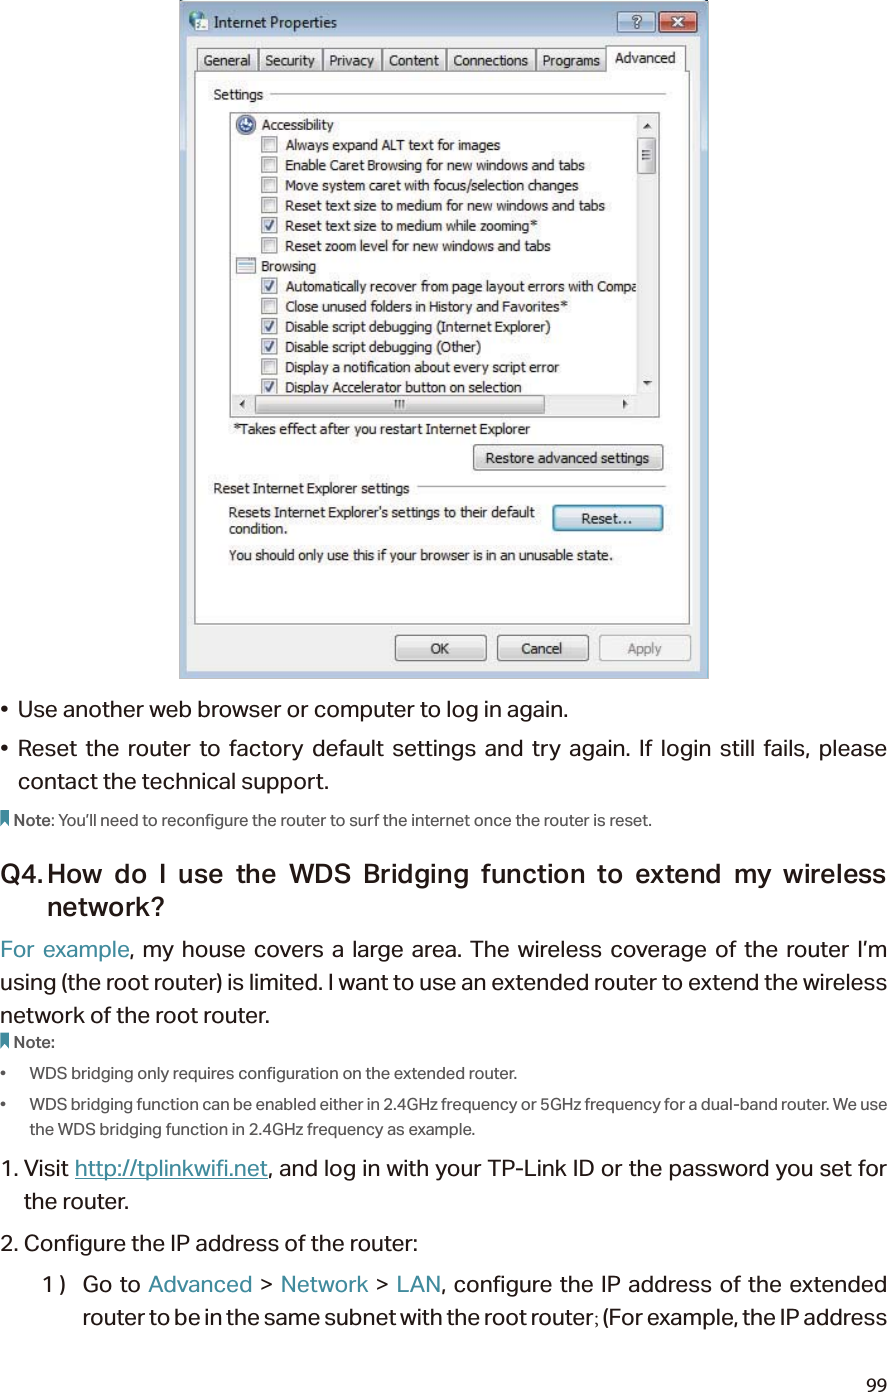 99•  Use another web browser or computer to log in again.• Reset the router to factory default settings and try again. If login still fails, please contact the technical support.Note: You’ll need to reconfigure the router to surf the internet once the router is reset.Q4. How do I use the WDS Bridging function to extend my wireless network?For example, my house covers a large area. The wireless coverage of the router I’m using (the root router) is limited. I want to use an extended router to extend the wireless network of the root router.Note:•  WDS bridging only requires configuration on the extended router.•  WDS bridging function can be enabled either in 2.4GHz frequency or 5GHz frequency for a dual-band router. We use the WDS bridging function in 2.4GHz frequency as example.1. Visit http://tplinkwifi.net, and log in with your TP-Link ID or the password you set for the router. 2. Configure the IP address of the router:1 )  Go to Advanced &gt; Network &gt; LAN, configure the IP address of the extended router to be in the same subnet with the root router; (For example, the IP address 